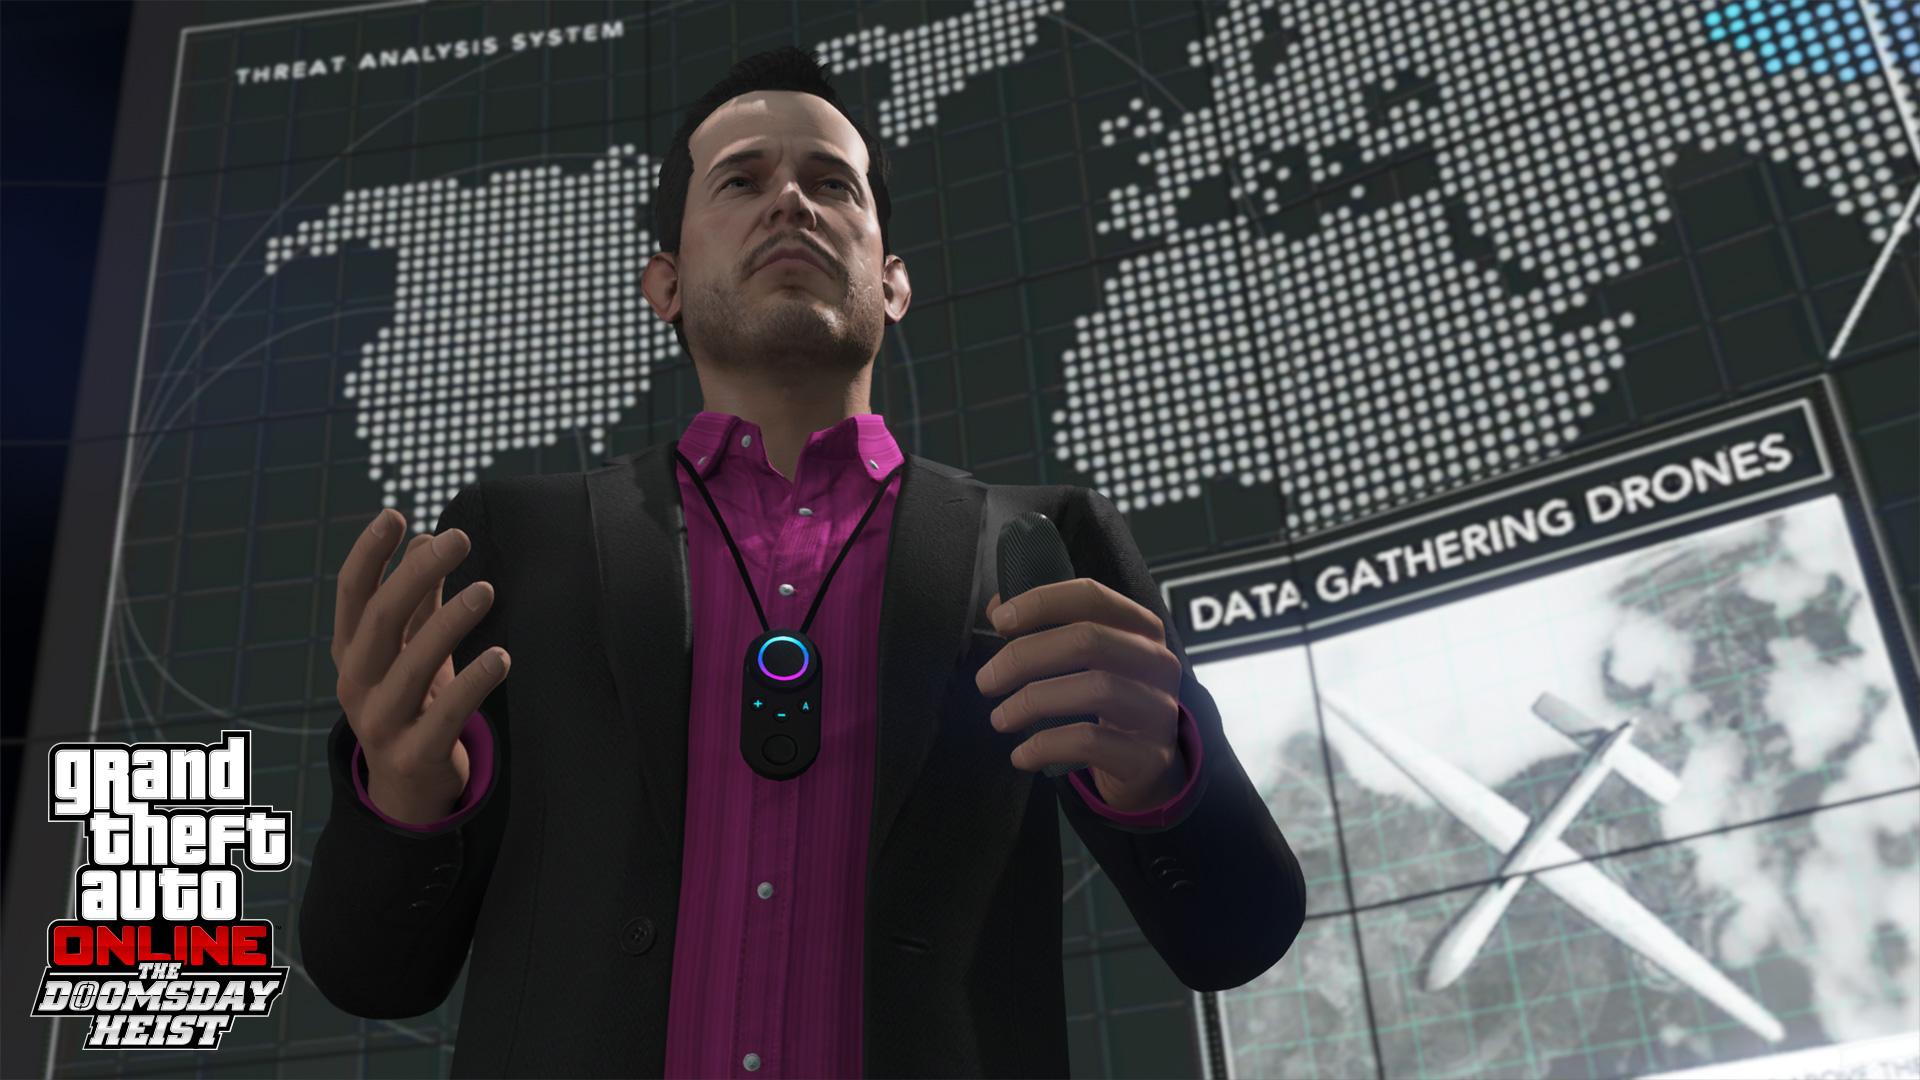 Screenshot №10 from game Grand Theft Auto V